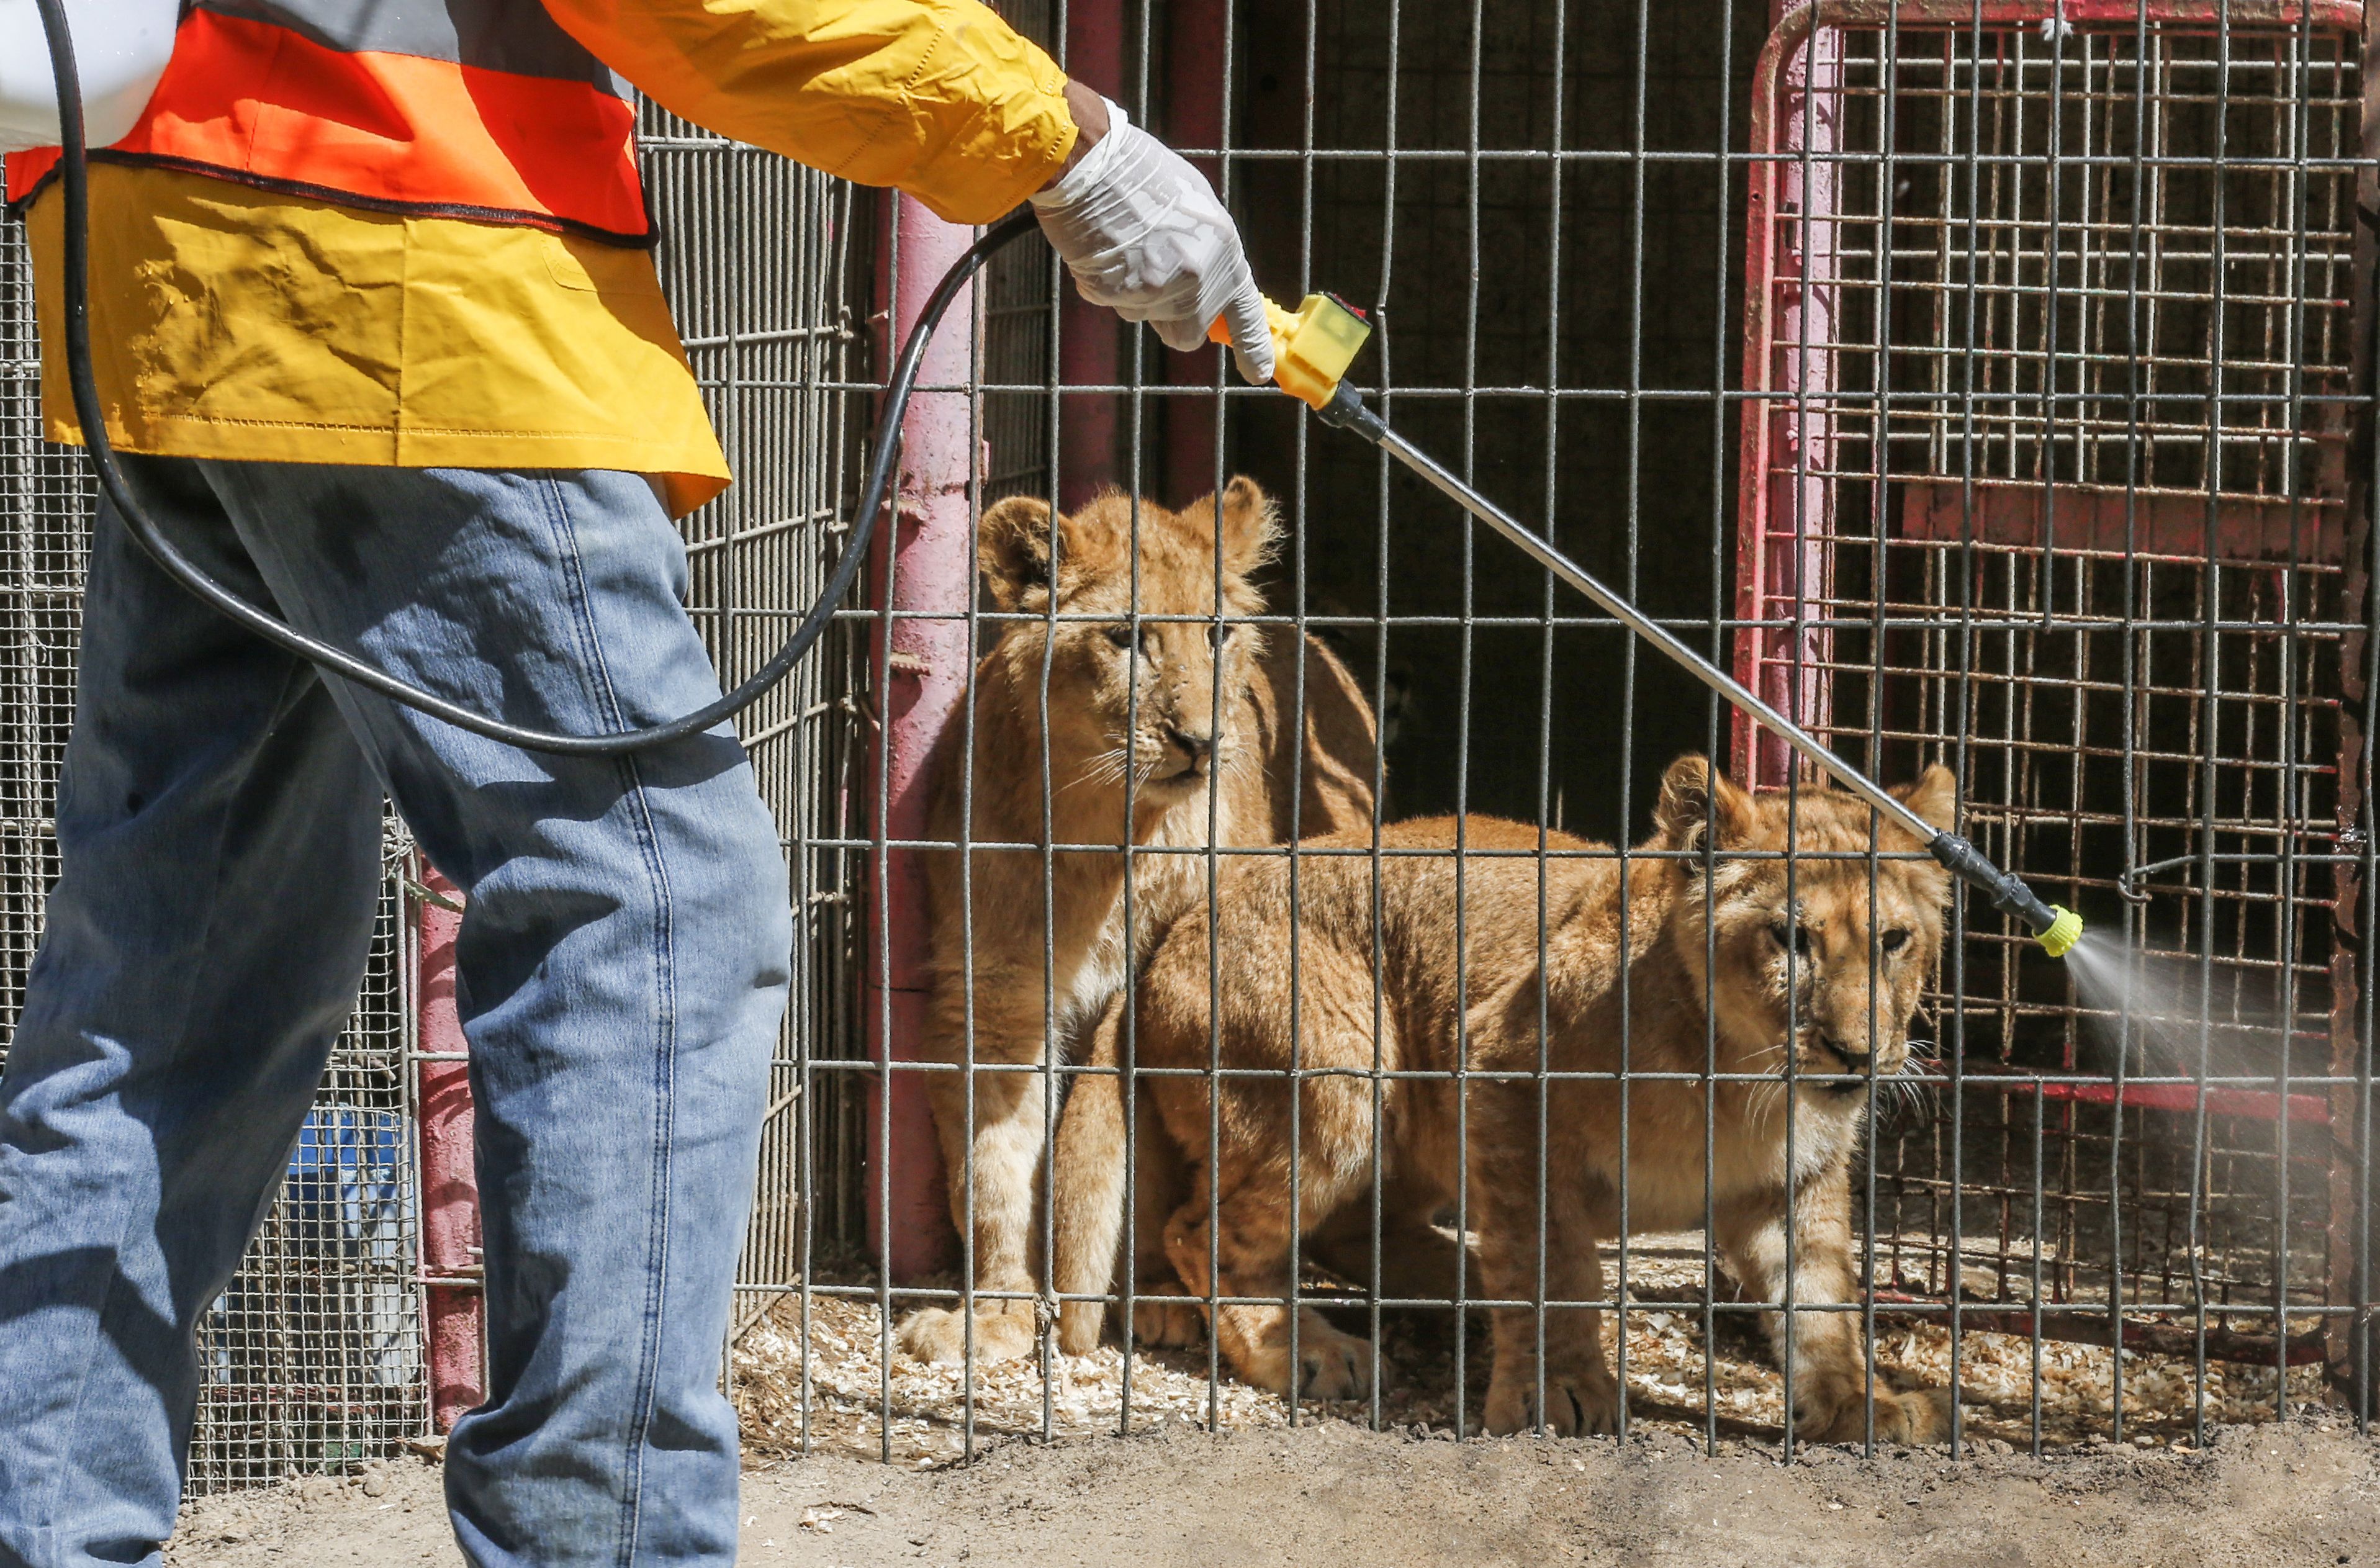 A Palestinian municipality worker disinfects the enclosures at Rafah Zoo in the southern Gaza Strip on March 11, 2020 amid the spread of coronavirus.